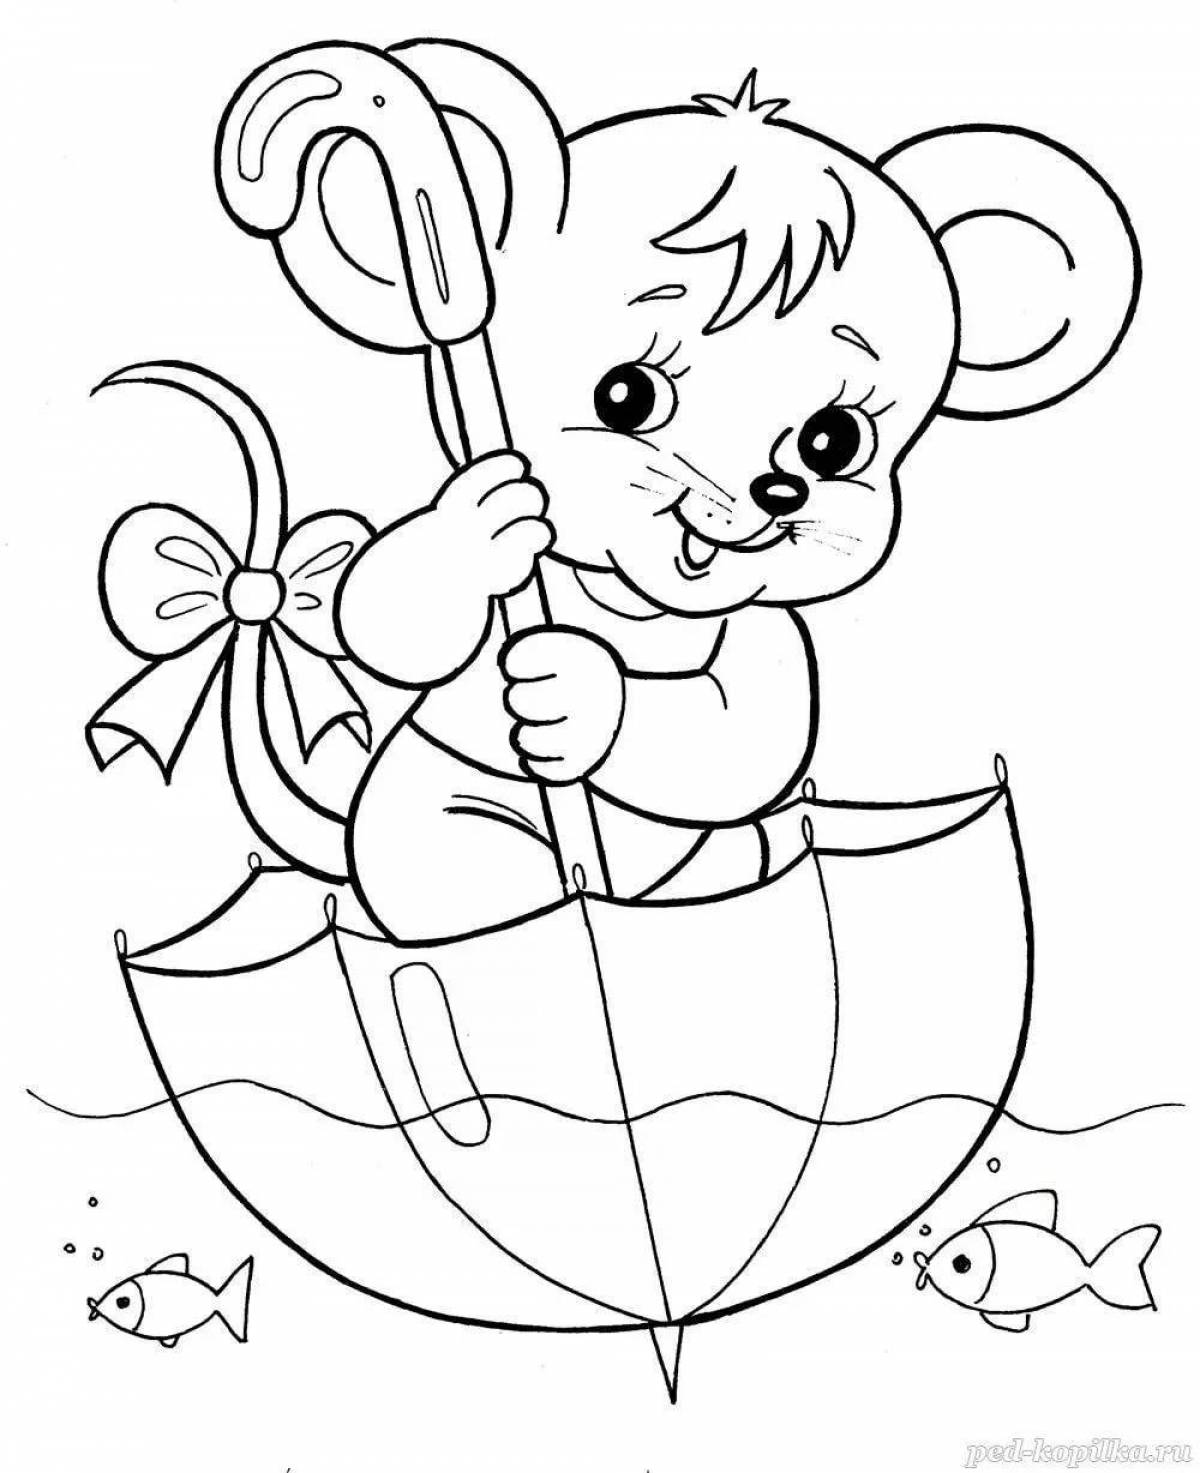 Creative coloring book for 4-5 year olds